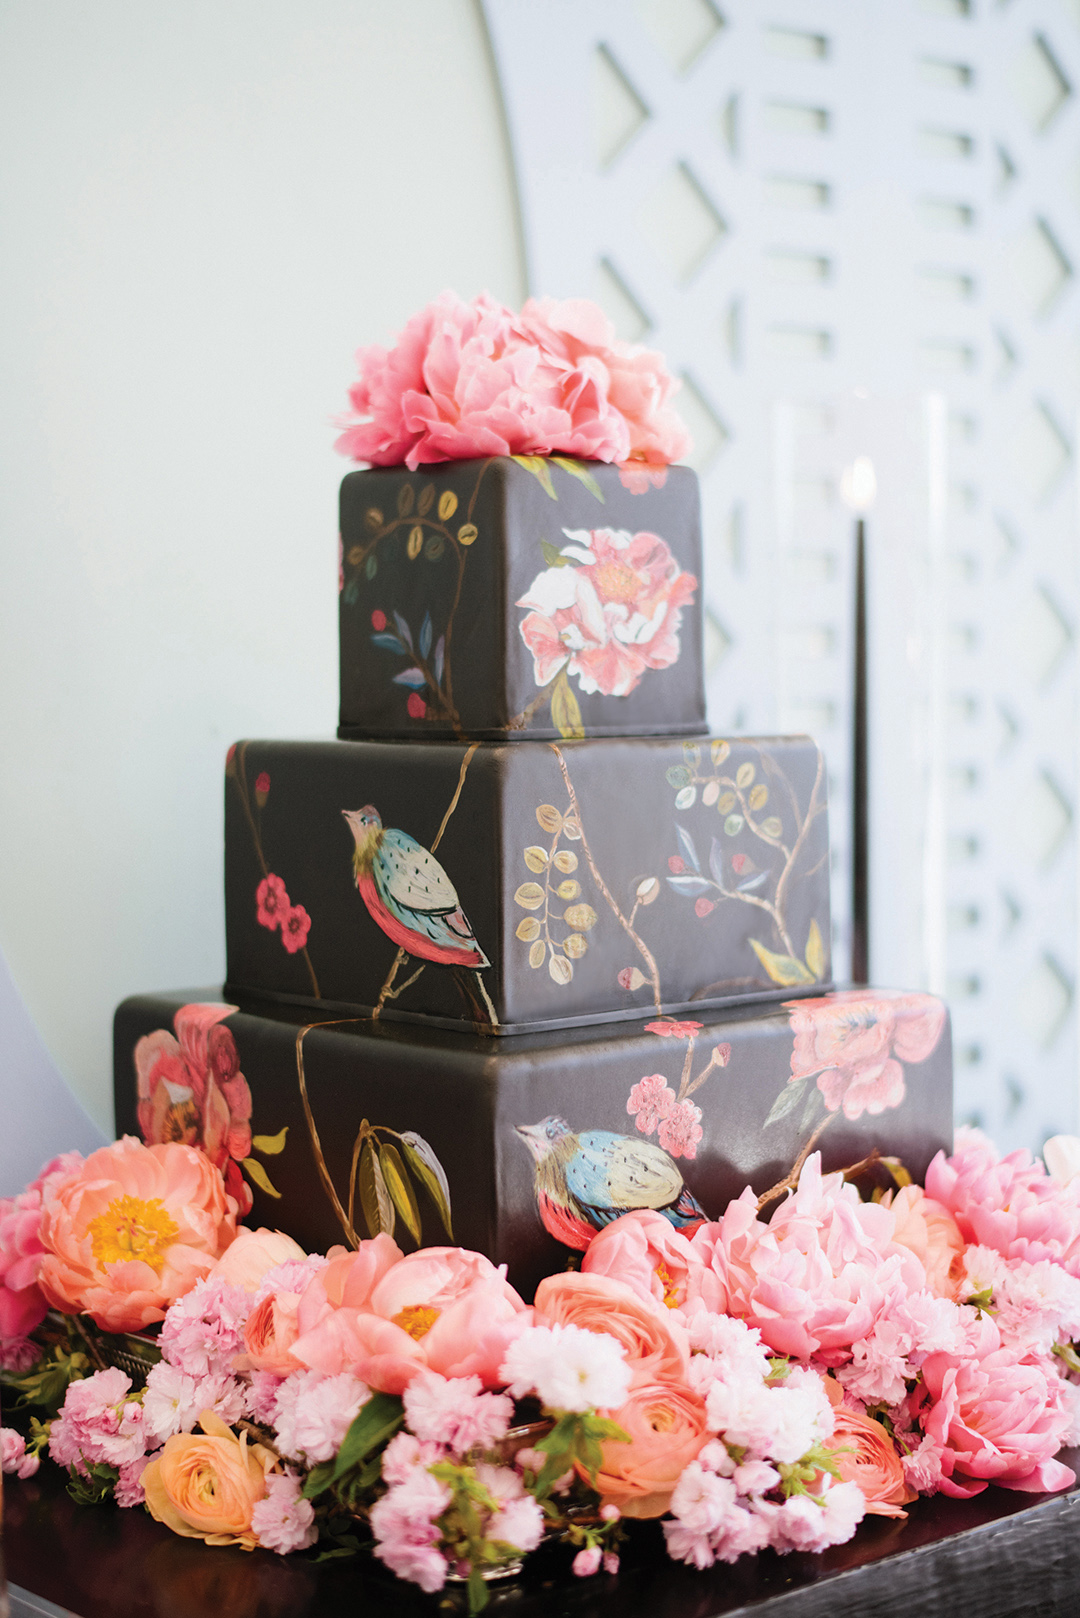 susie's cakes & confections, black cake, painted design, pink flowers, coral, gourmet cake